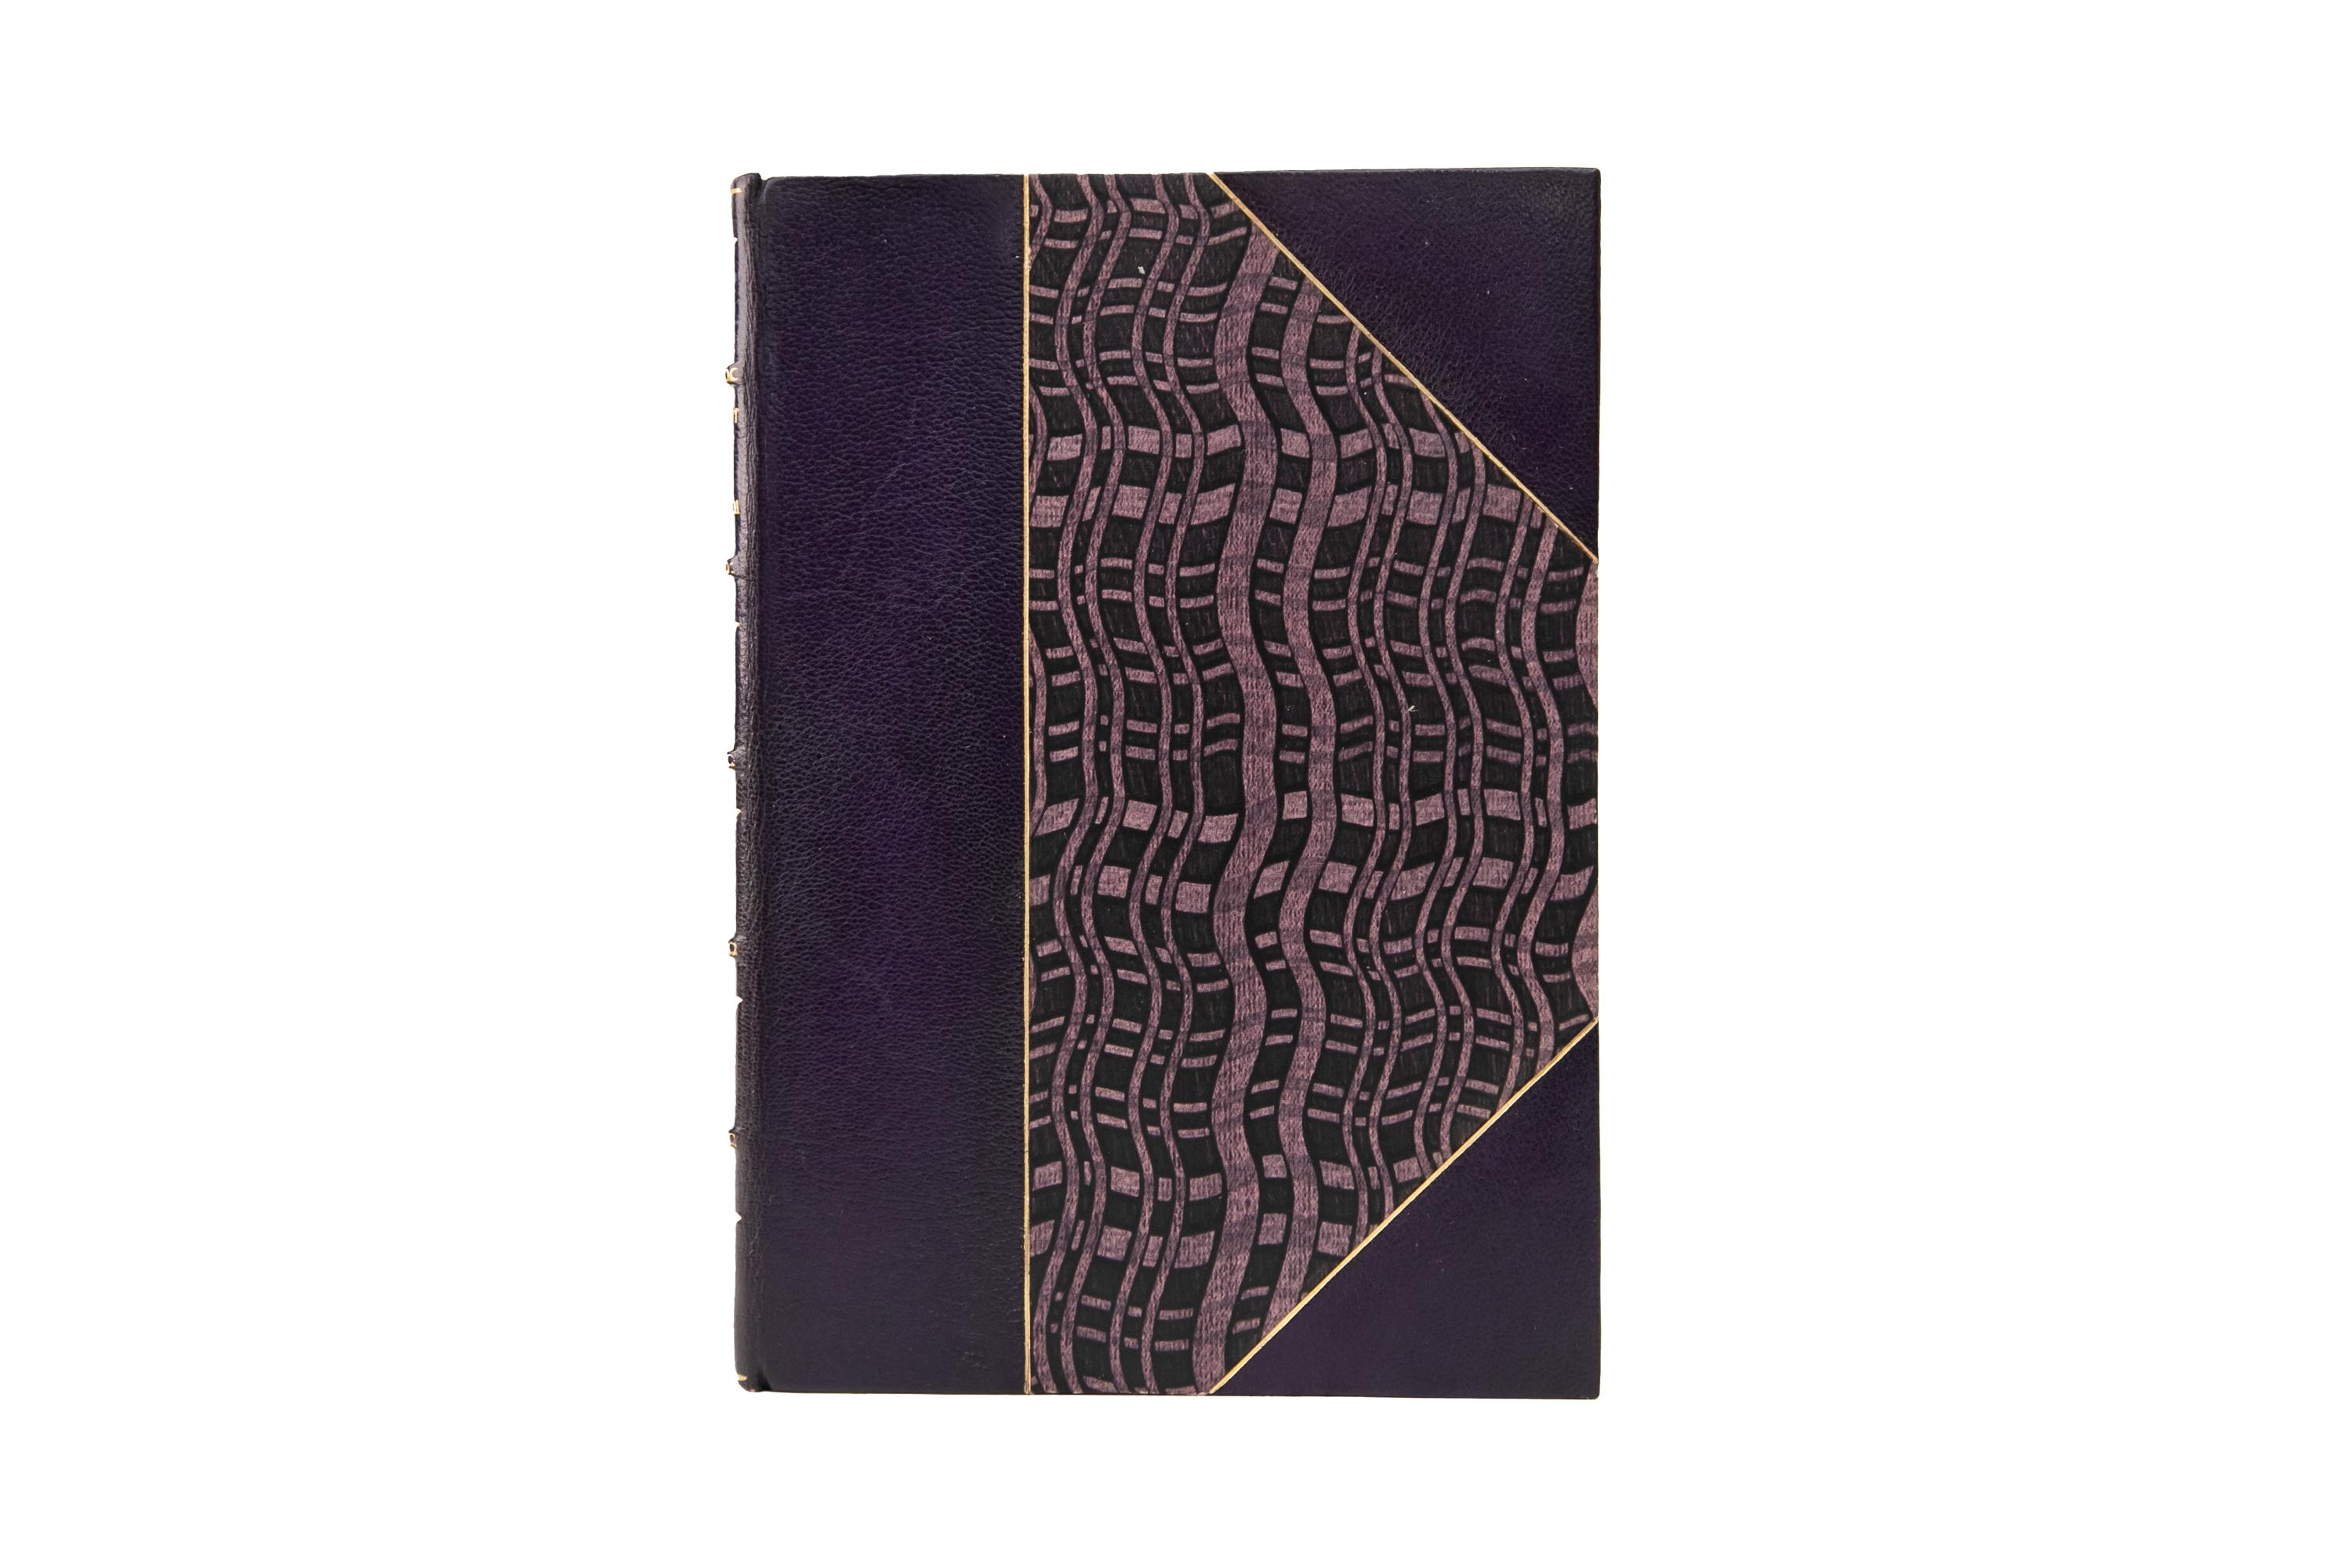 1 Volume. Edward Fitzgerald, Rubáiyát of Omar Khayyám. Bound by Whitman Bennet Binderies in 3/4 purple morocco and decorative boards, bordered in gilt-tooling. The spines display raised bands and ornate gilt-tooled detailing. The top edge is gilded